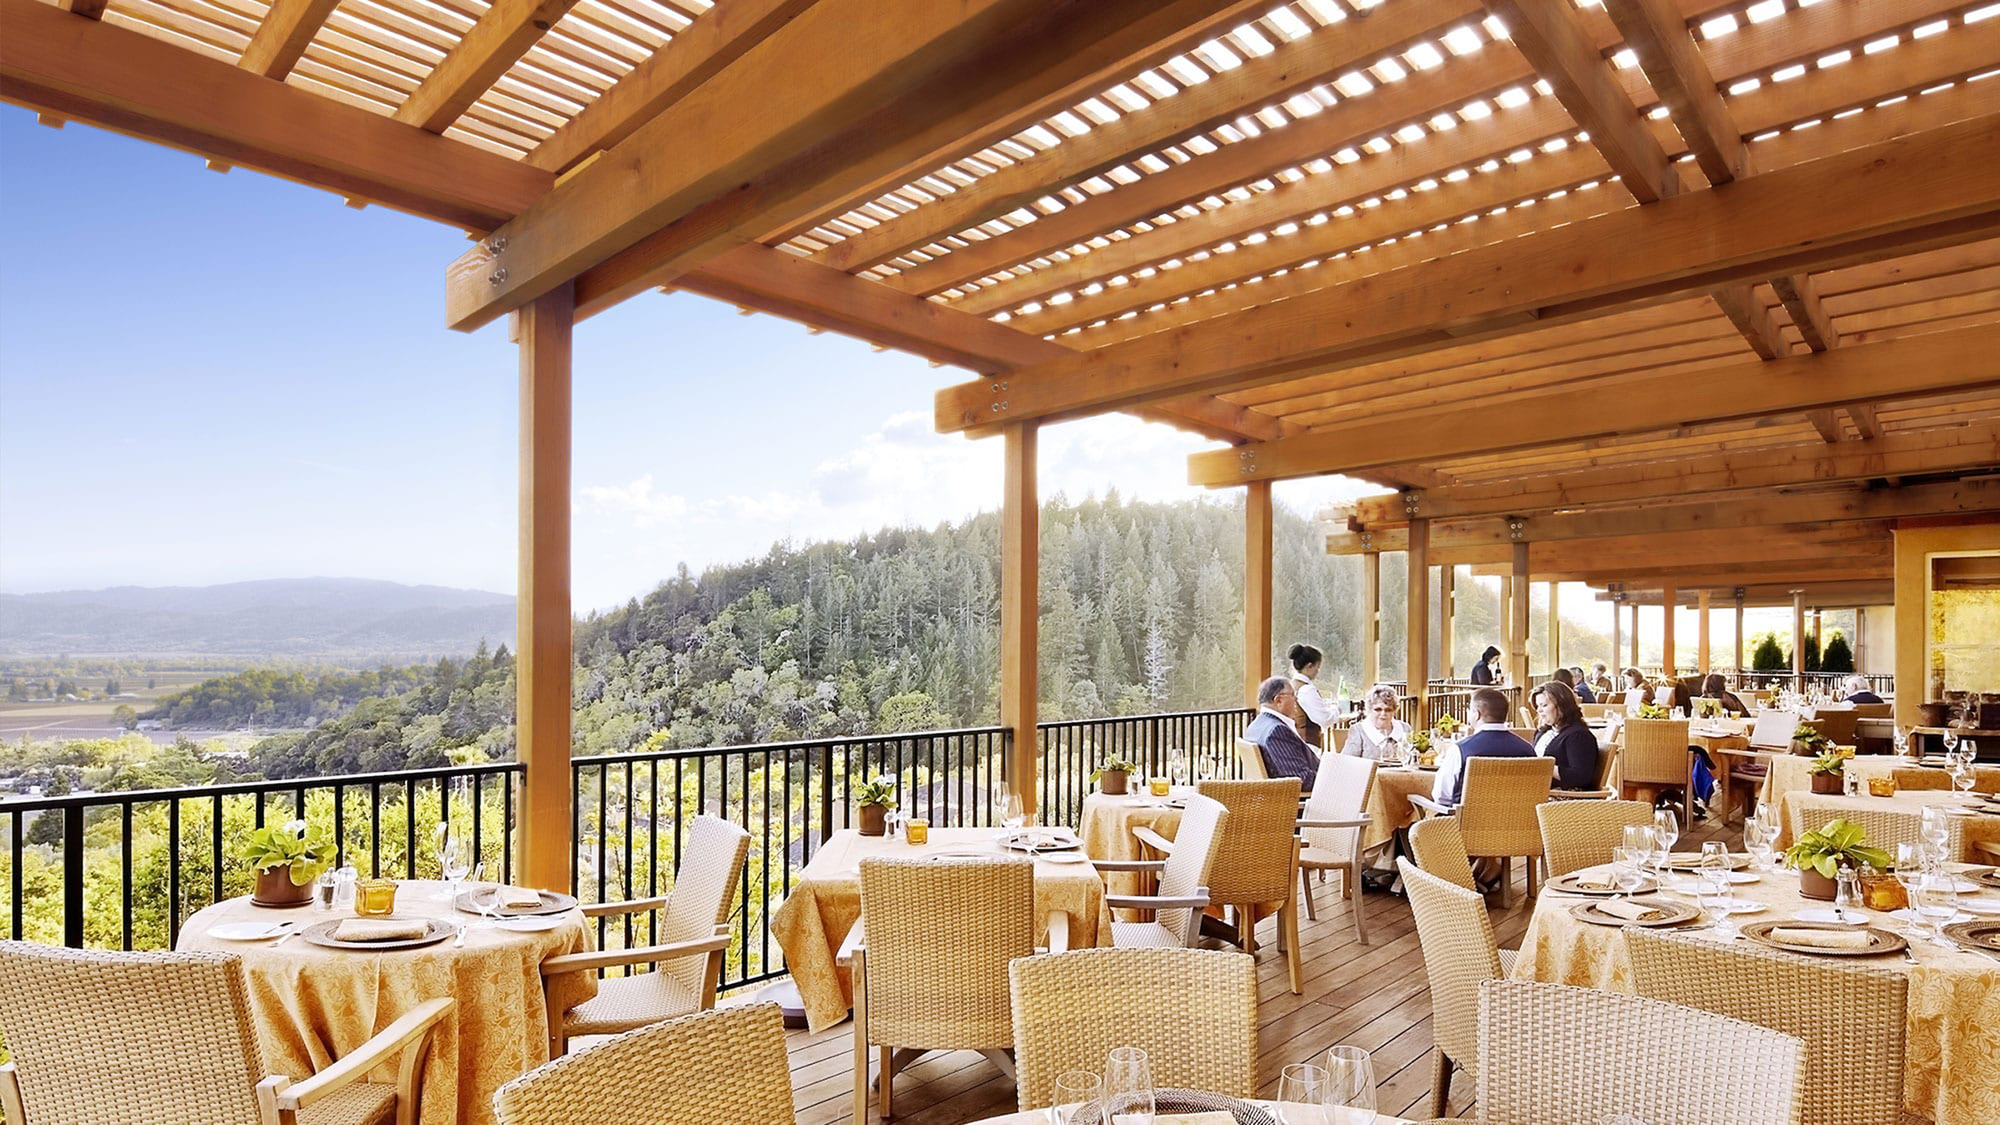 The terrace on the bistro of Auberge du Soleil in Napa Valley.